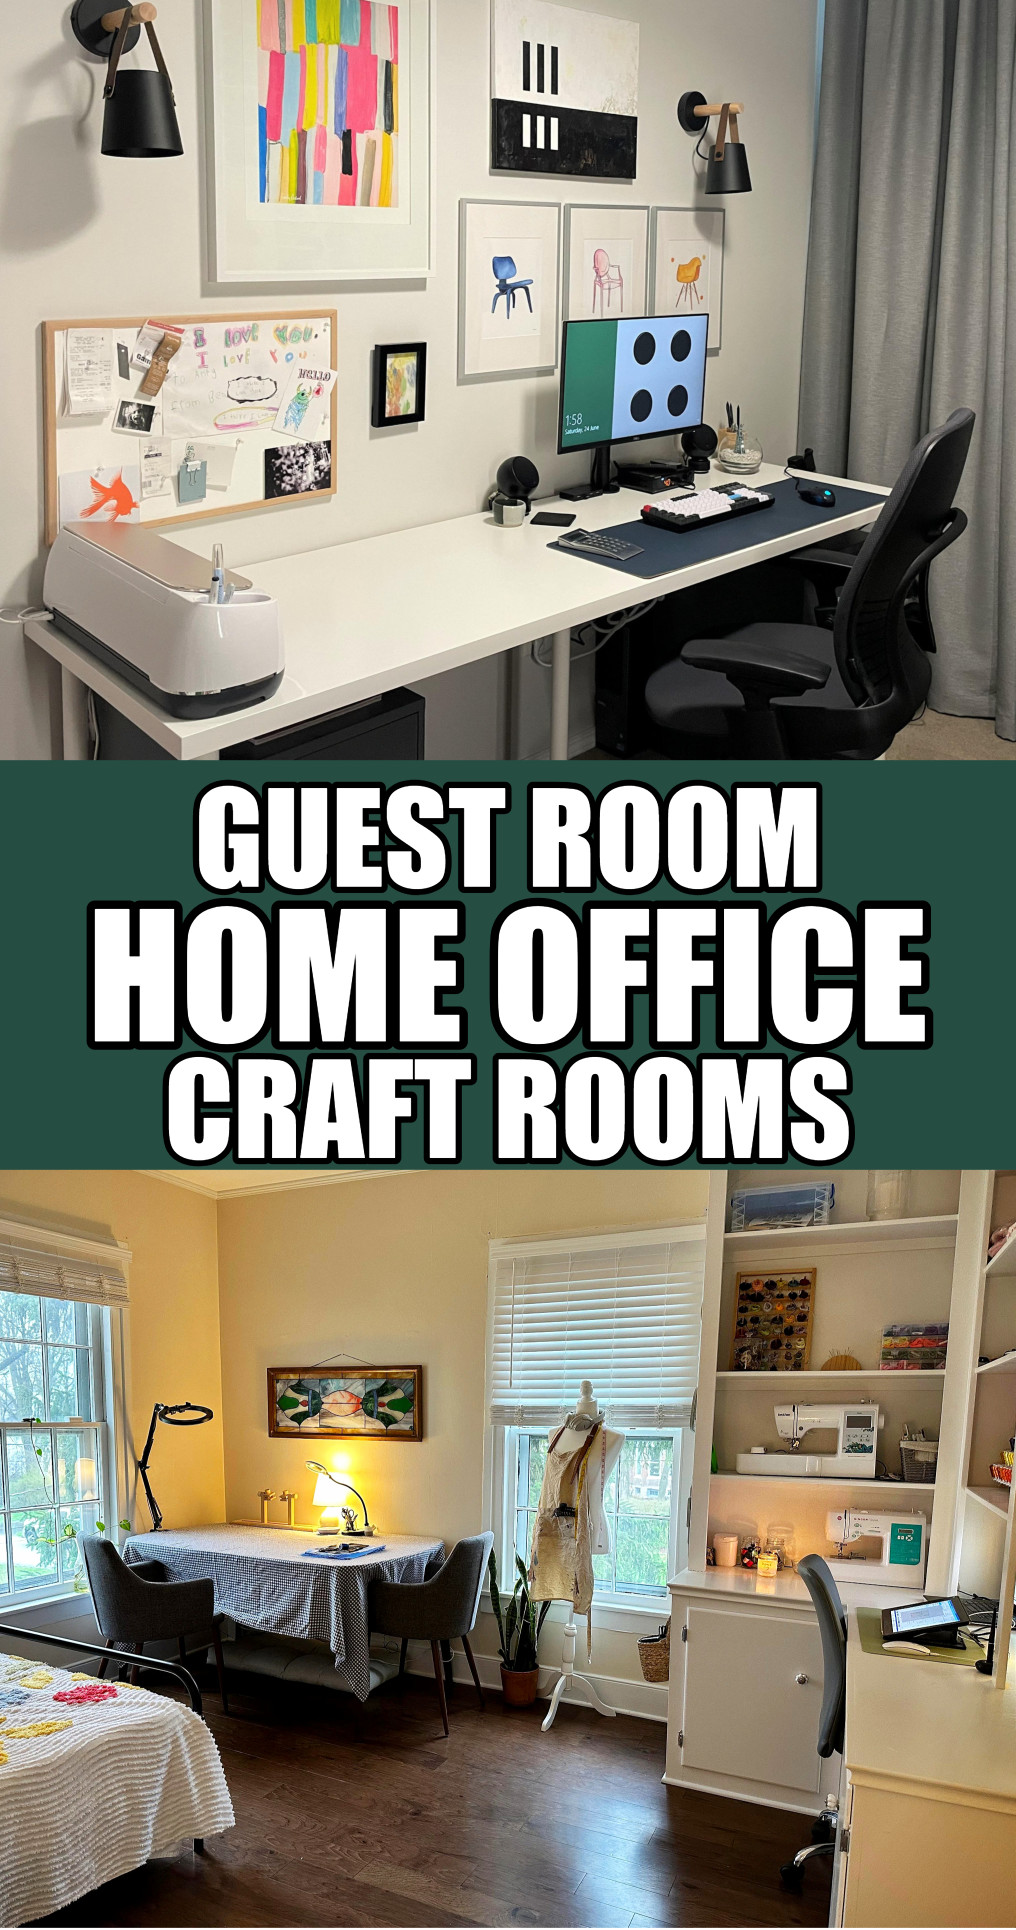 Guest room home office craft rooms